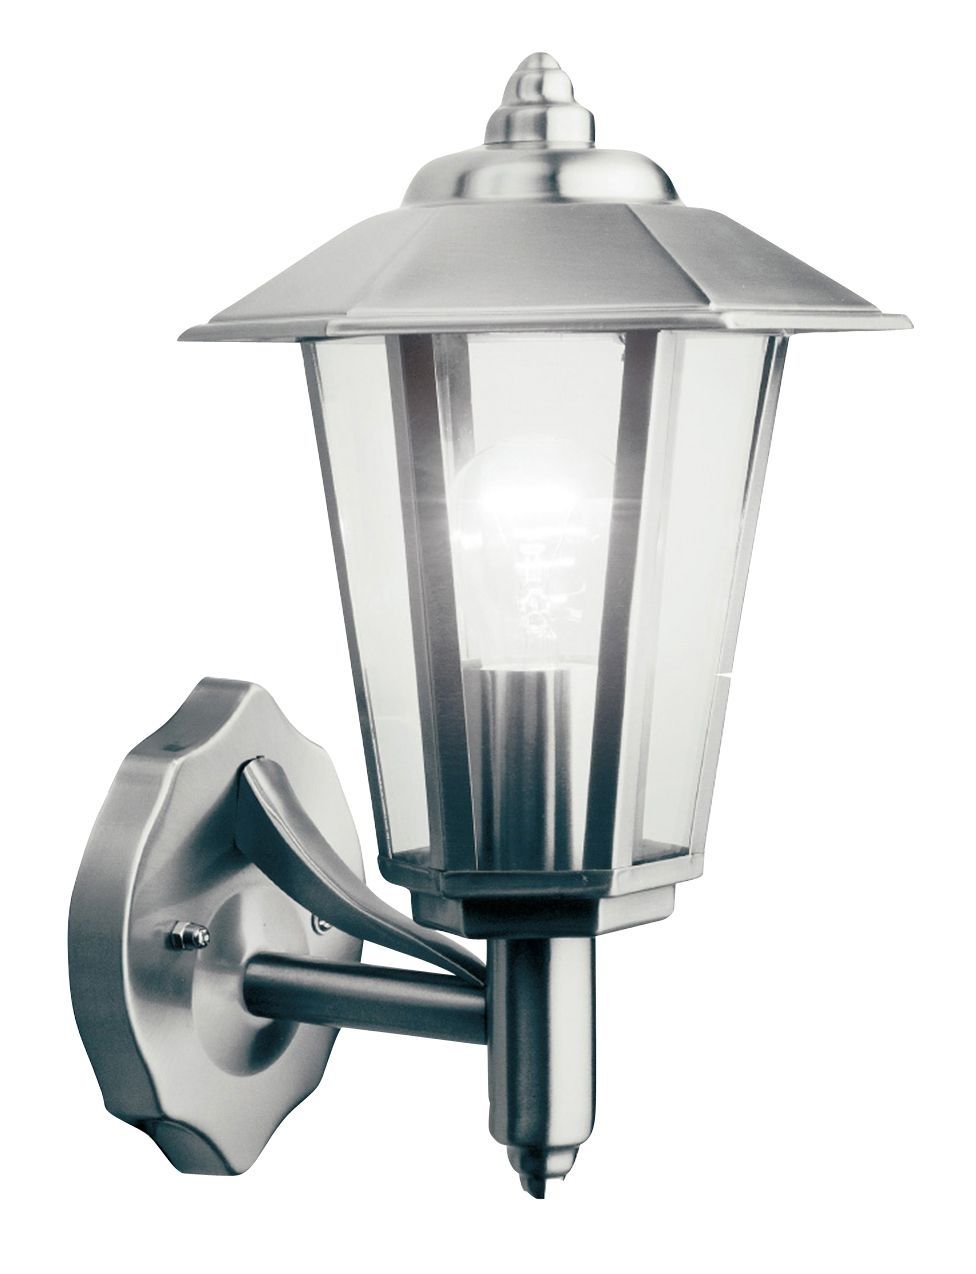 Newport Stainless Steel Mains Powered External Wall Lantern Pertaining To Outdoor Wall Lighting At B&q (View 6 of 15)